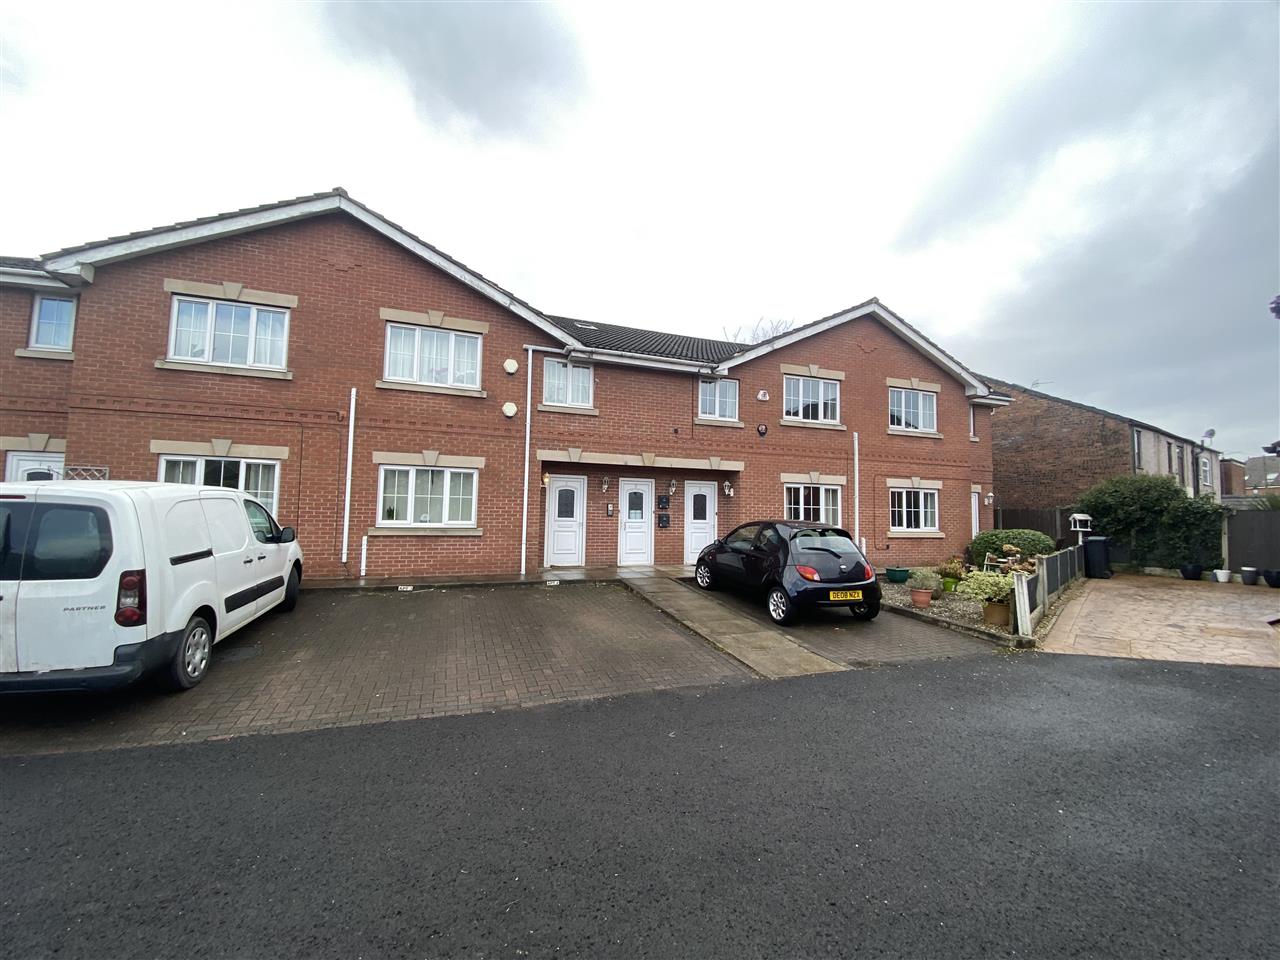 2 bed apartment to rent in Alden Court, Westhoughton, Westhoughton - Property Image 1